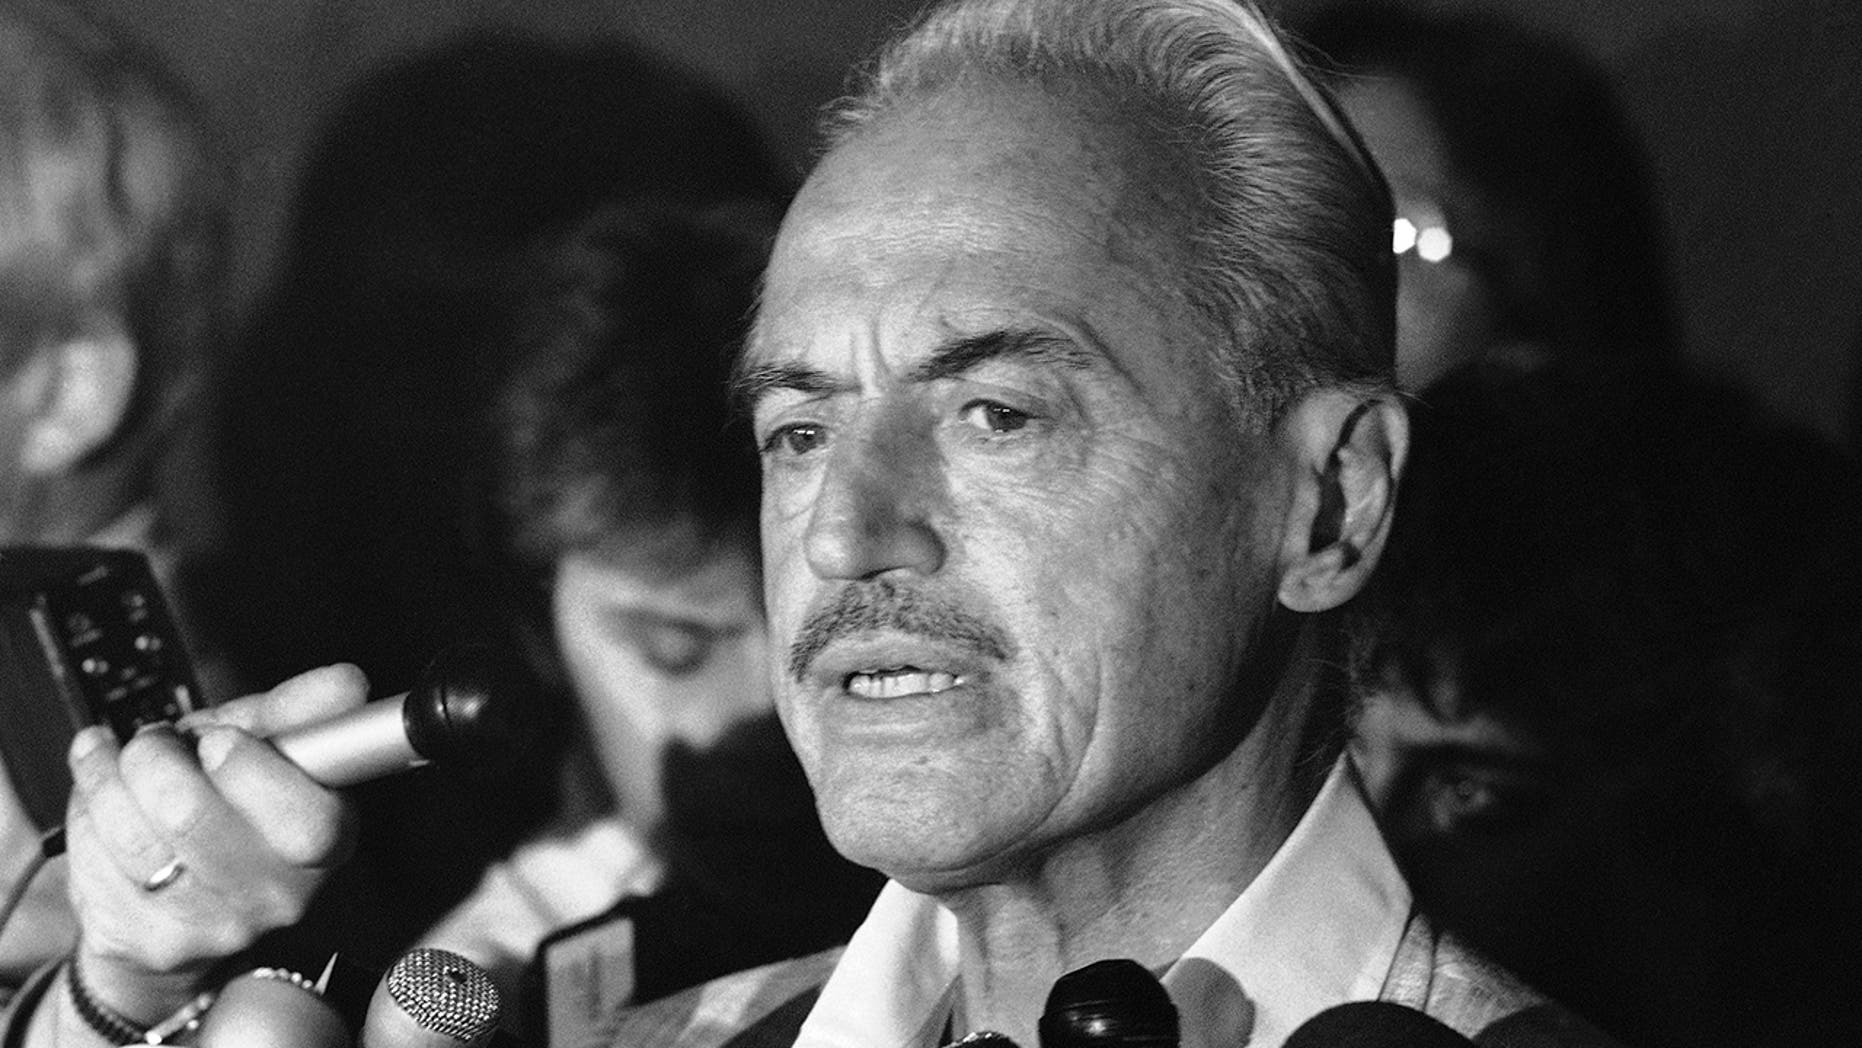 FILE - This July 16, 1981 file photo shows baseball union leader Marvin Miller speaking to reporters after rejecting a proposal to end a baseball strike, in New York. Miller, the union leader who revolutionized baseball by empowering players to negotiate multimillion-dollar contracts and to play for teams of their own choosing, was elected to baseball's Hall of Fame on Sunday, Dec. 8, 2019. (AP Photo/Howard, File)